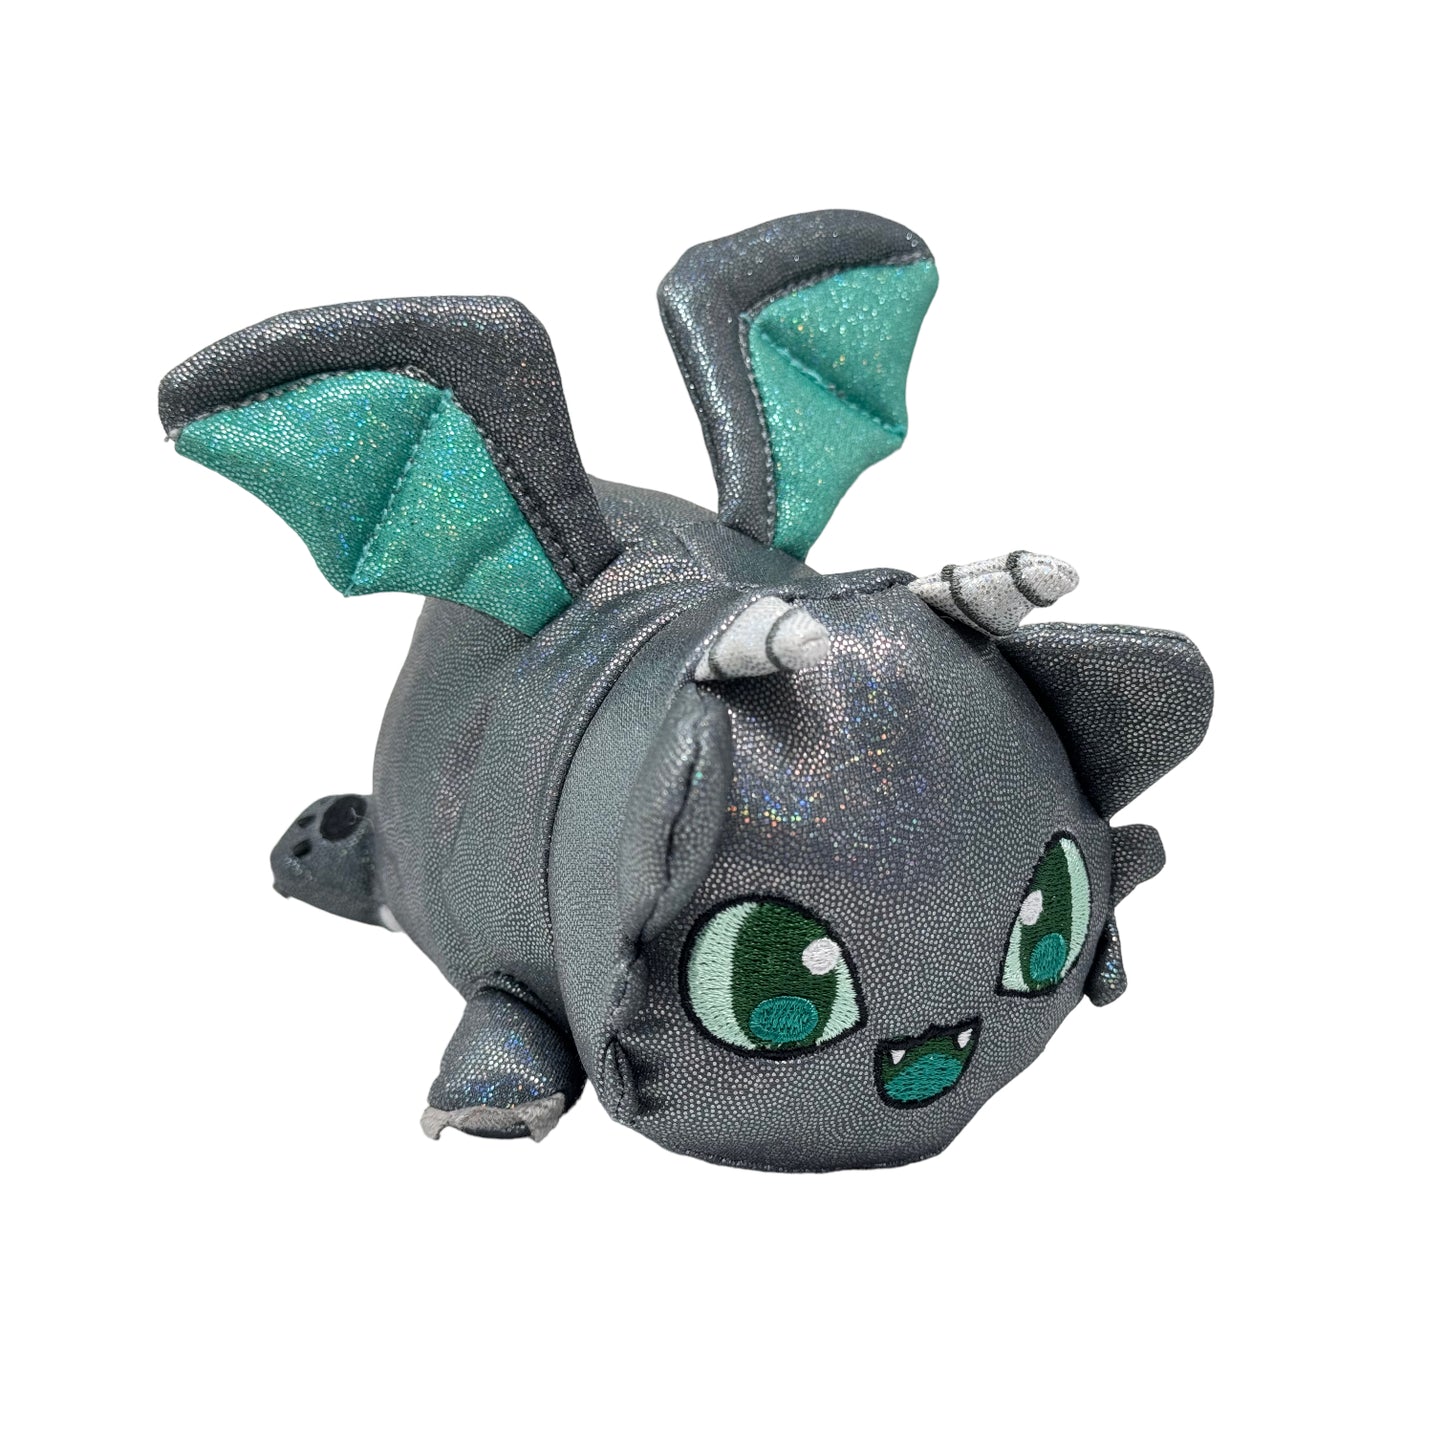 SPARKLE DRAGON CAT MeeMeows 6" Plush from Aphmau (NEW) Limited Edition & RARE